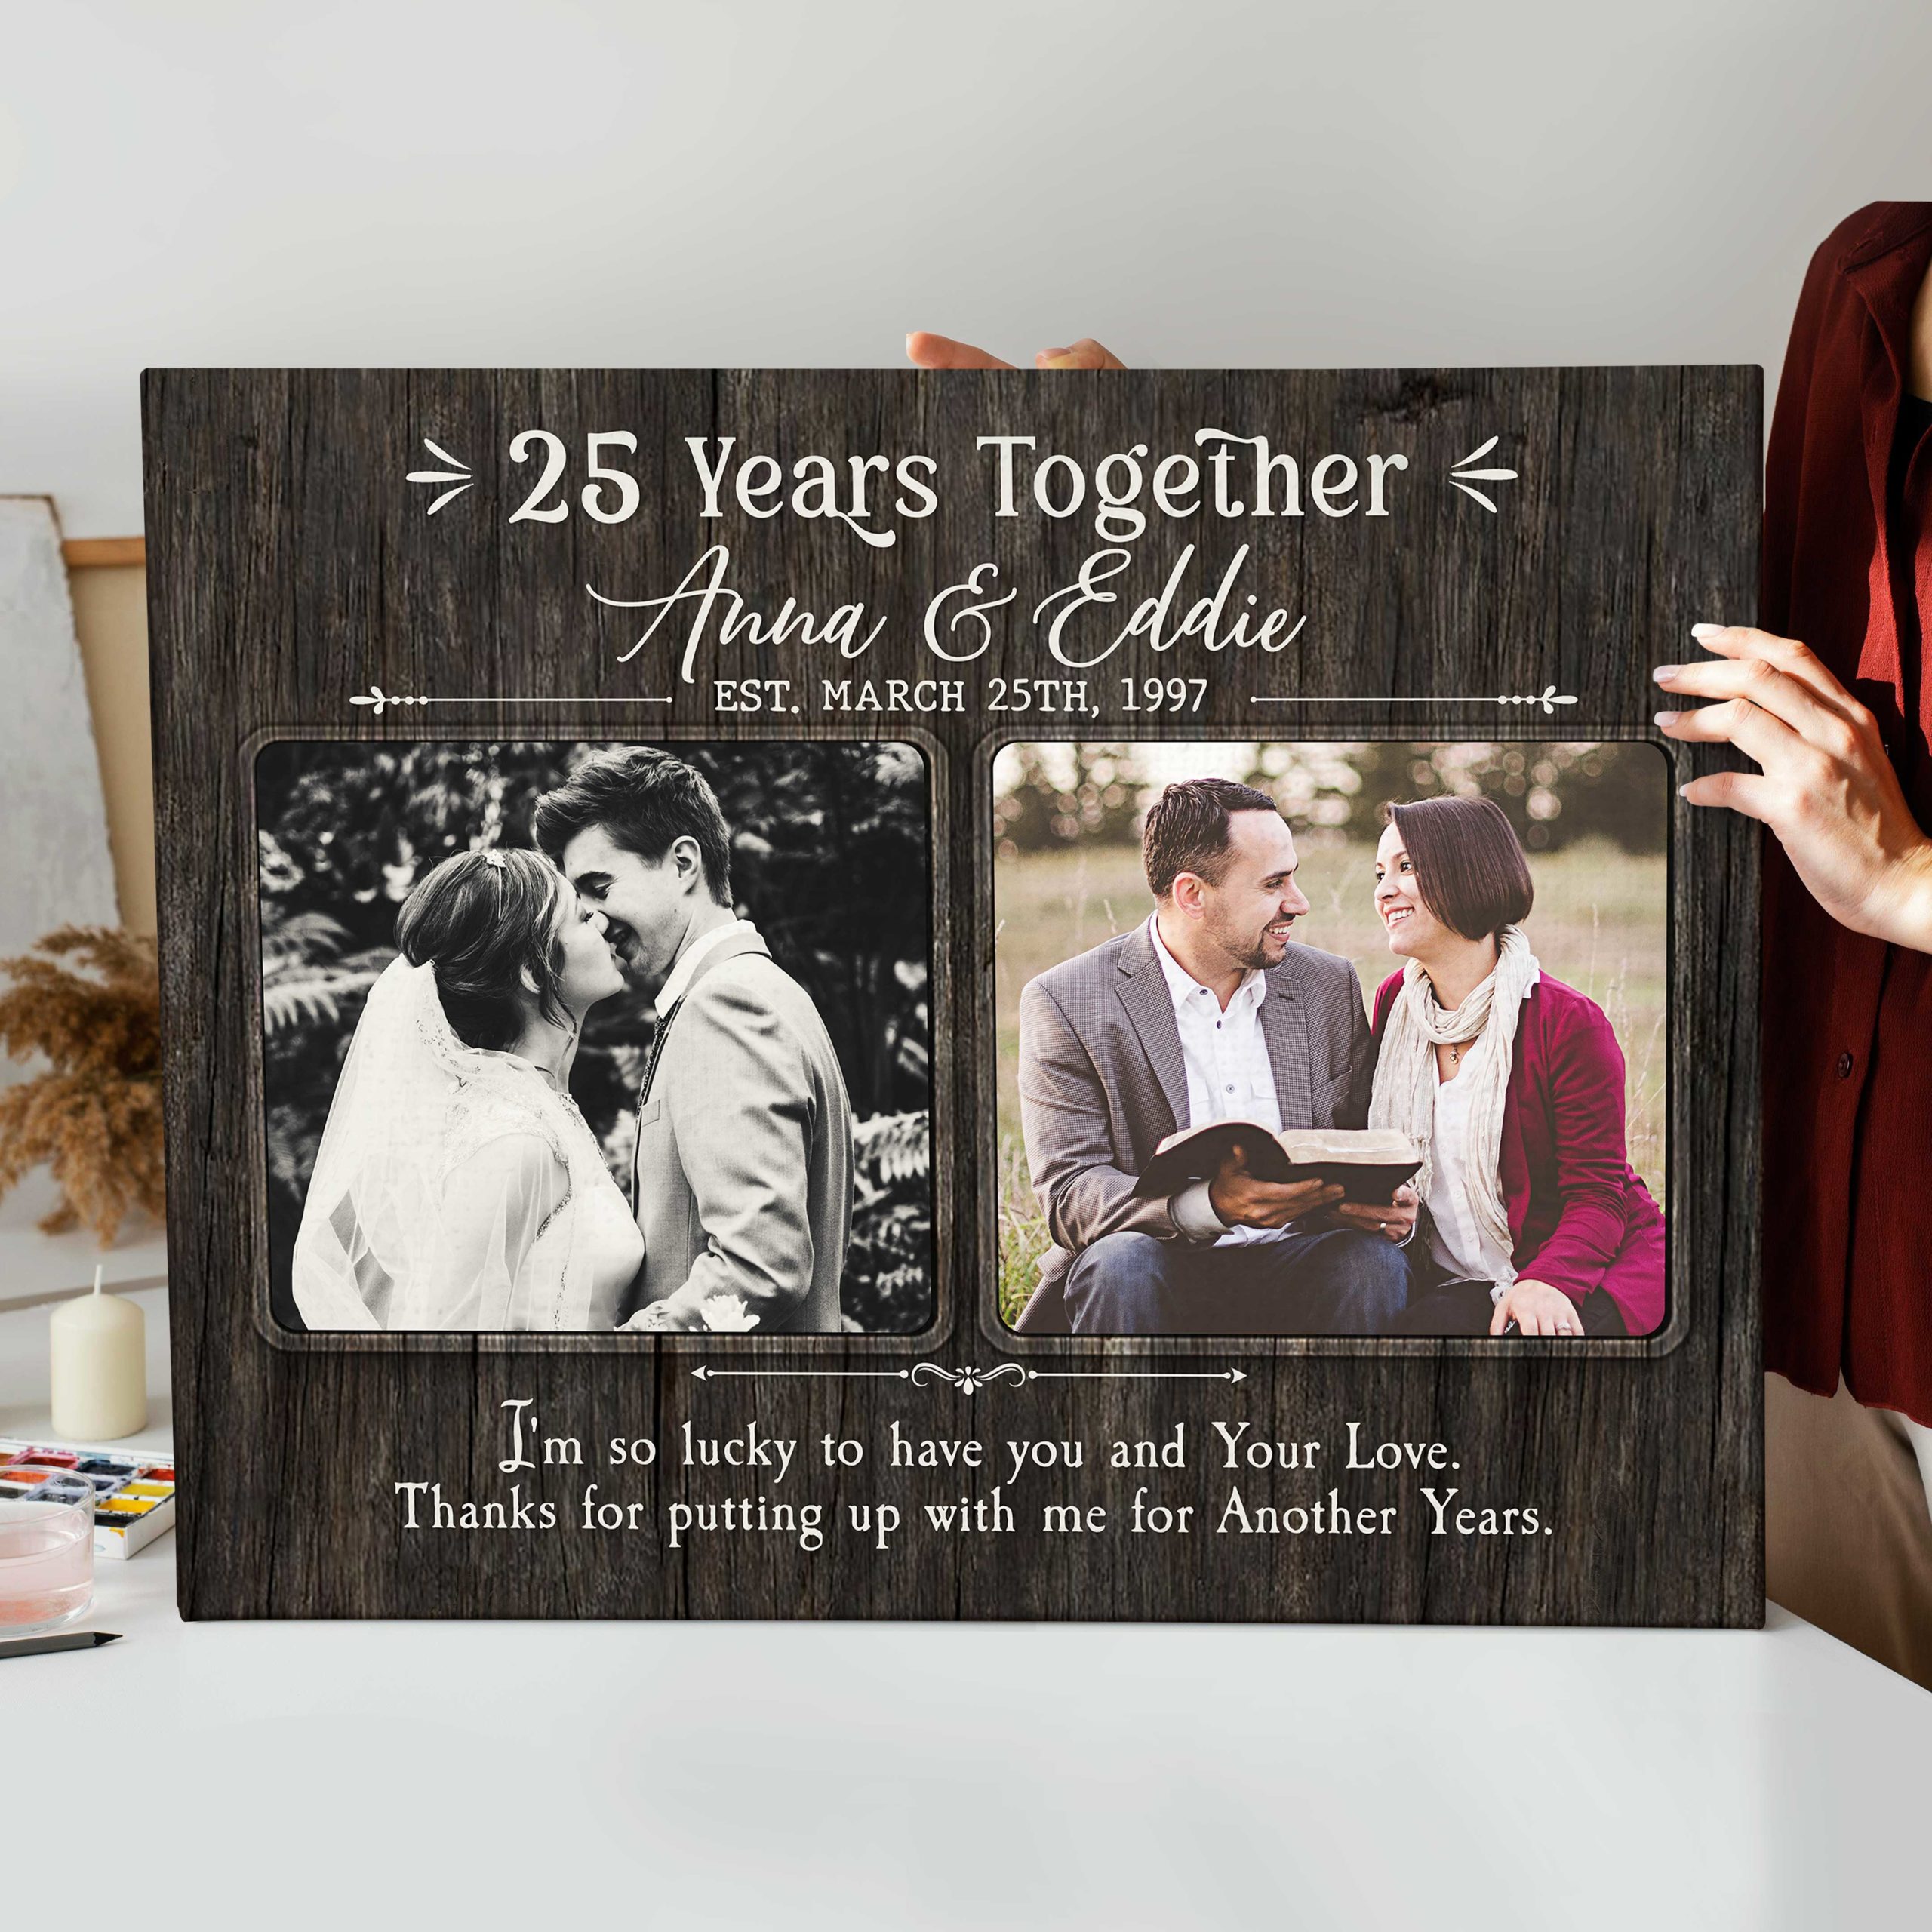 Gift Ideas for Wedding Anniversaries ♥ 1st, 10th, 25th & 50th Anniversary  Ideas! - YouTube